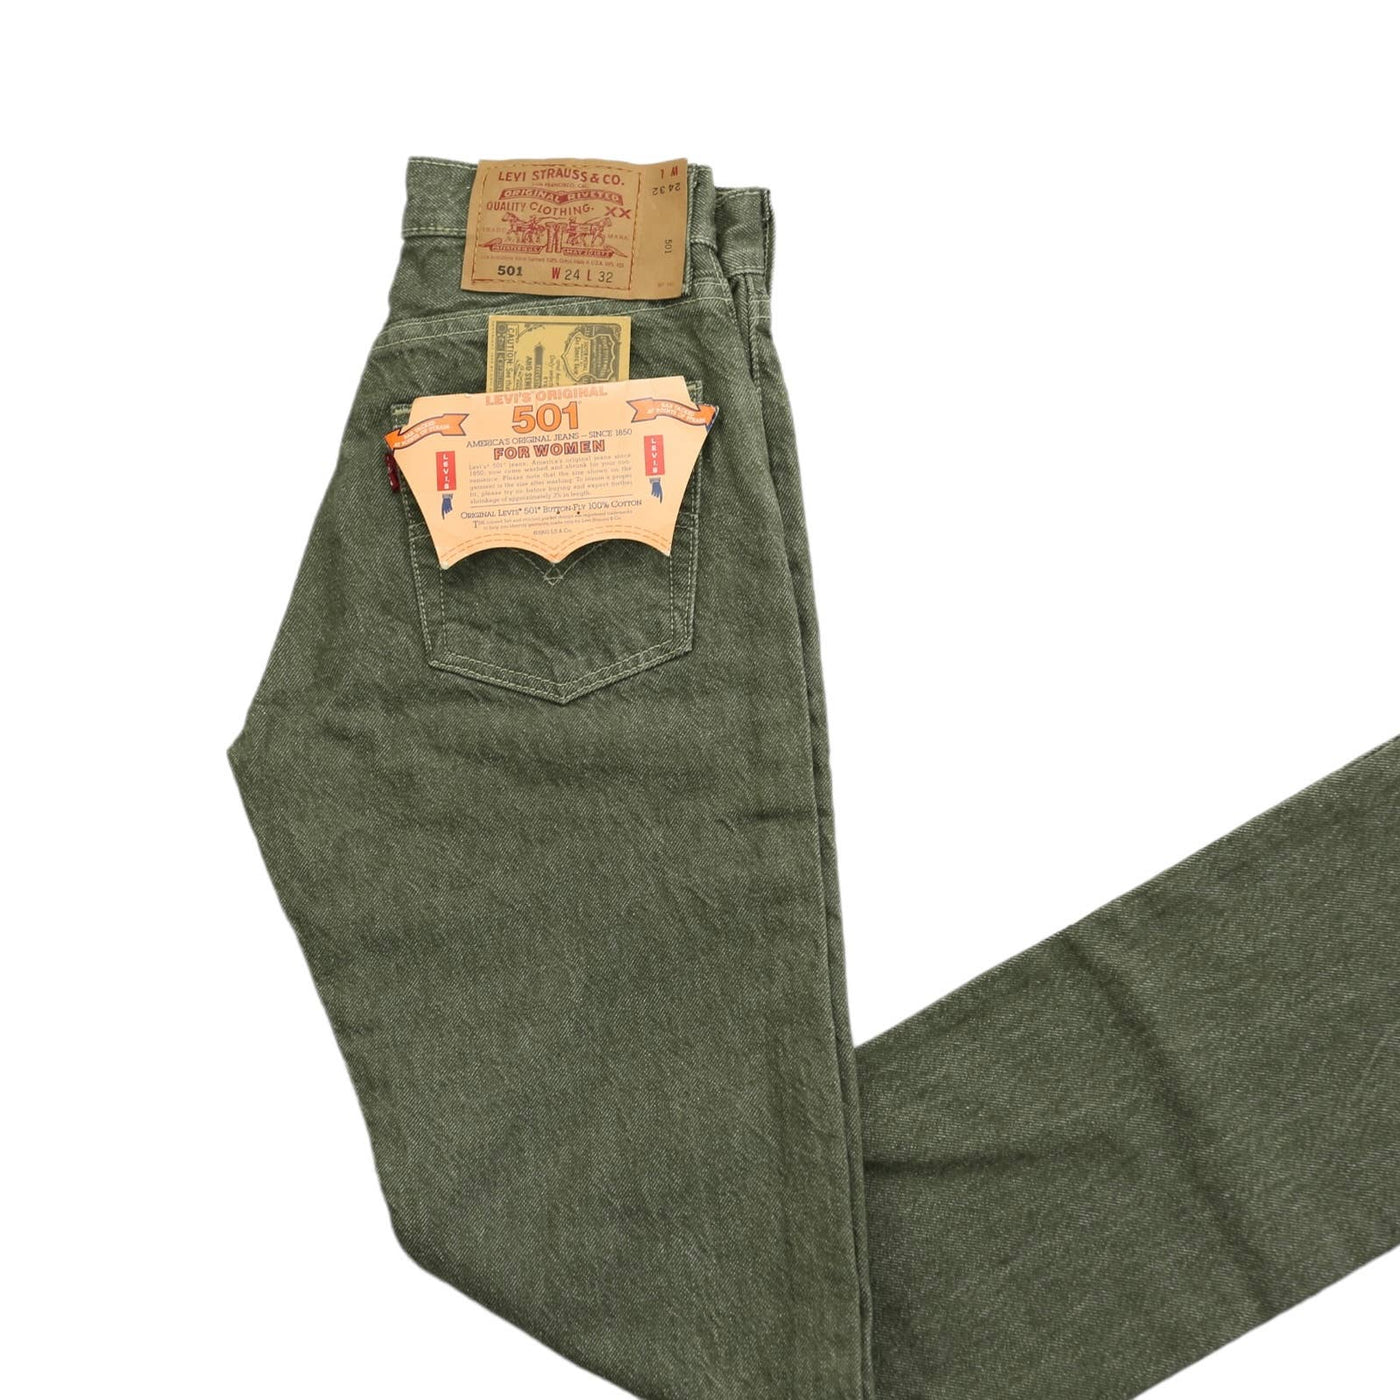 Vintage Levi’s 501 Deadstock Green Button Fly Jeans